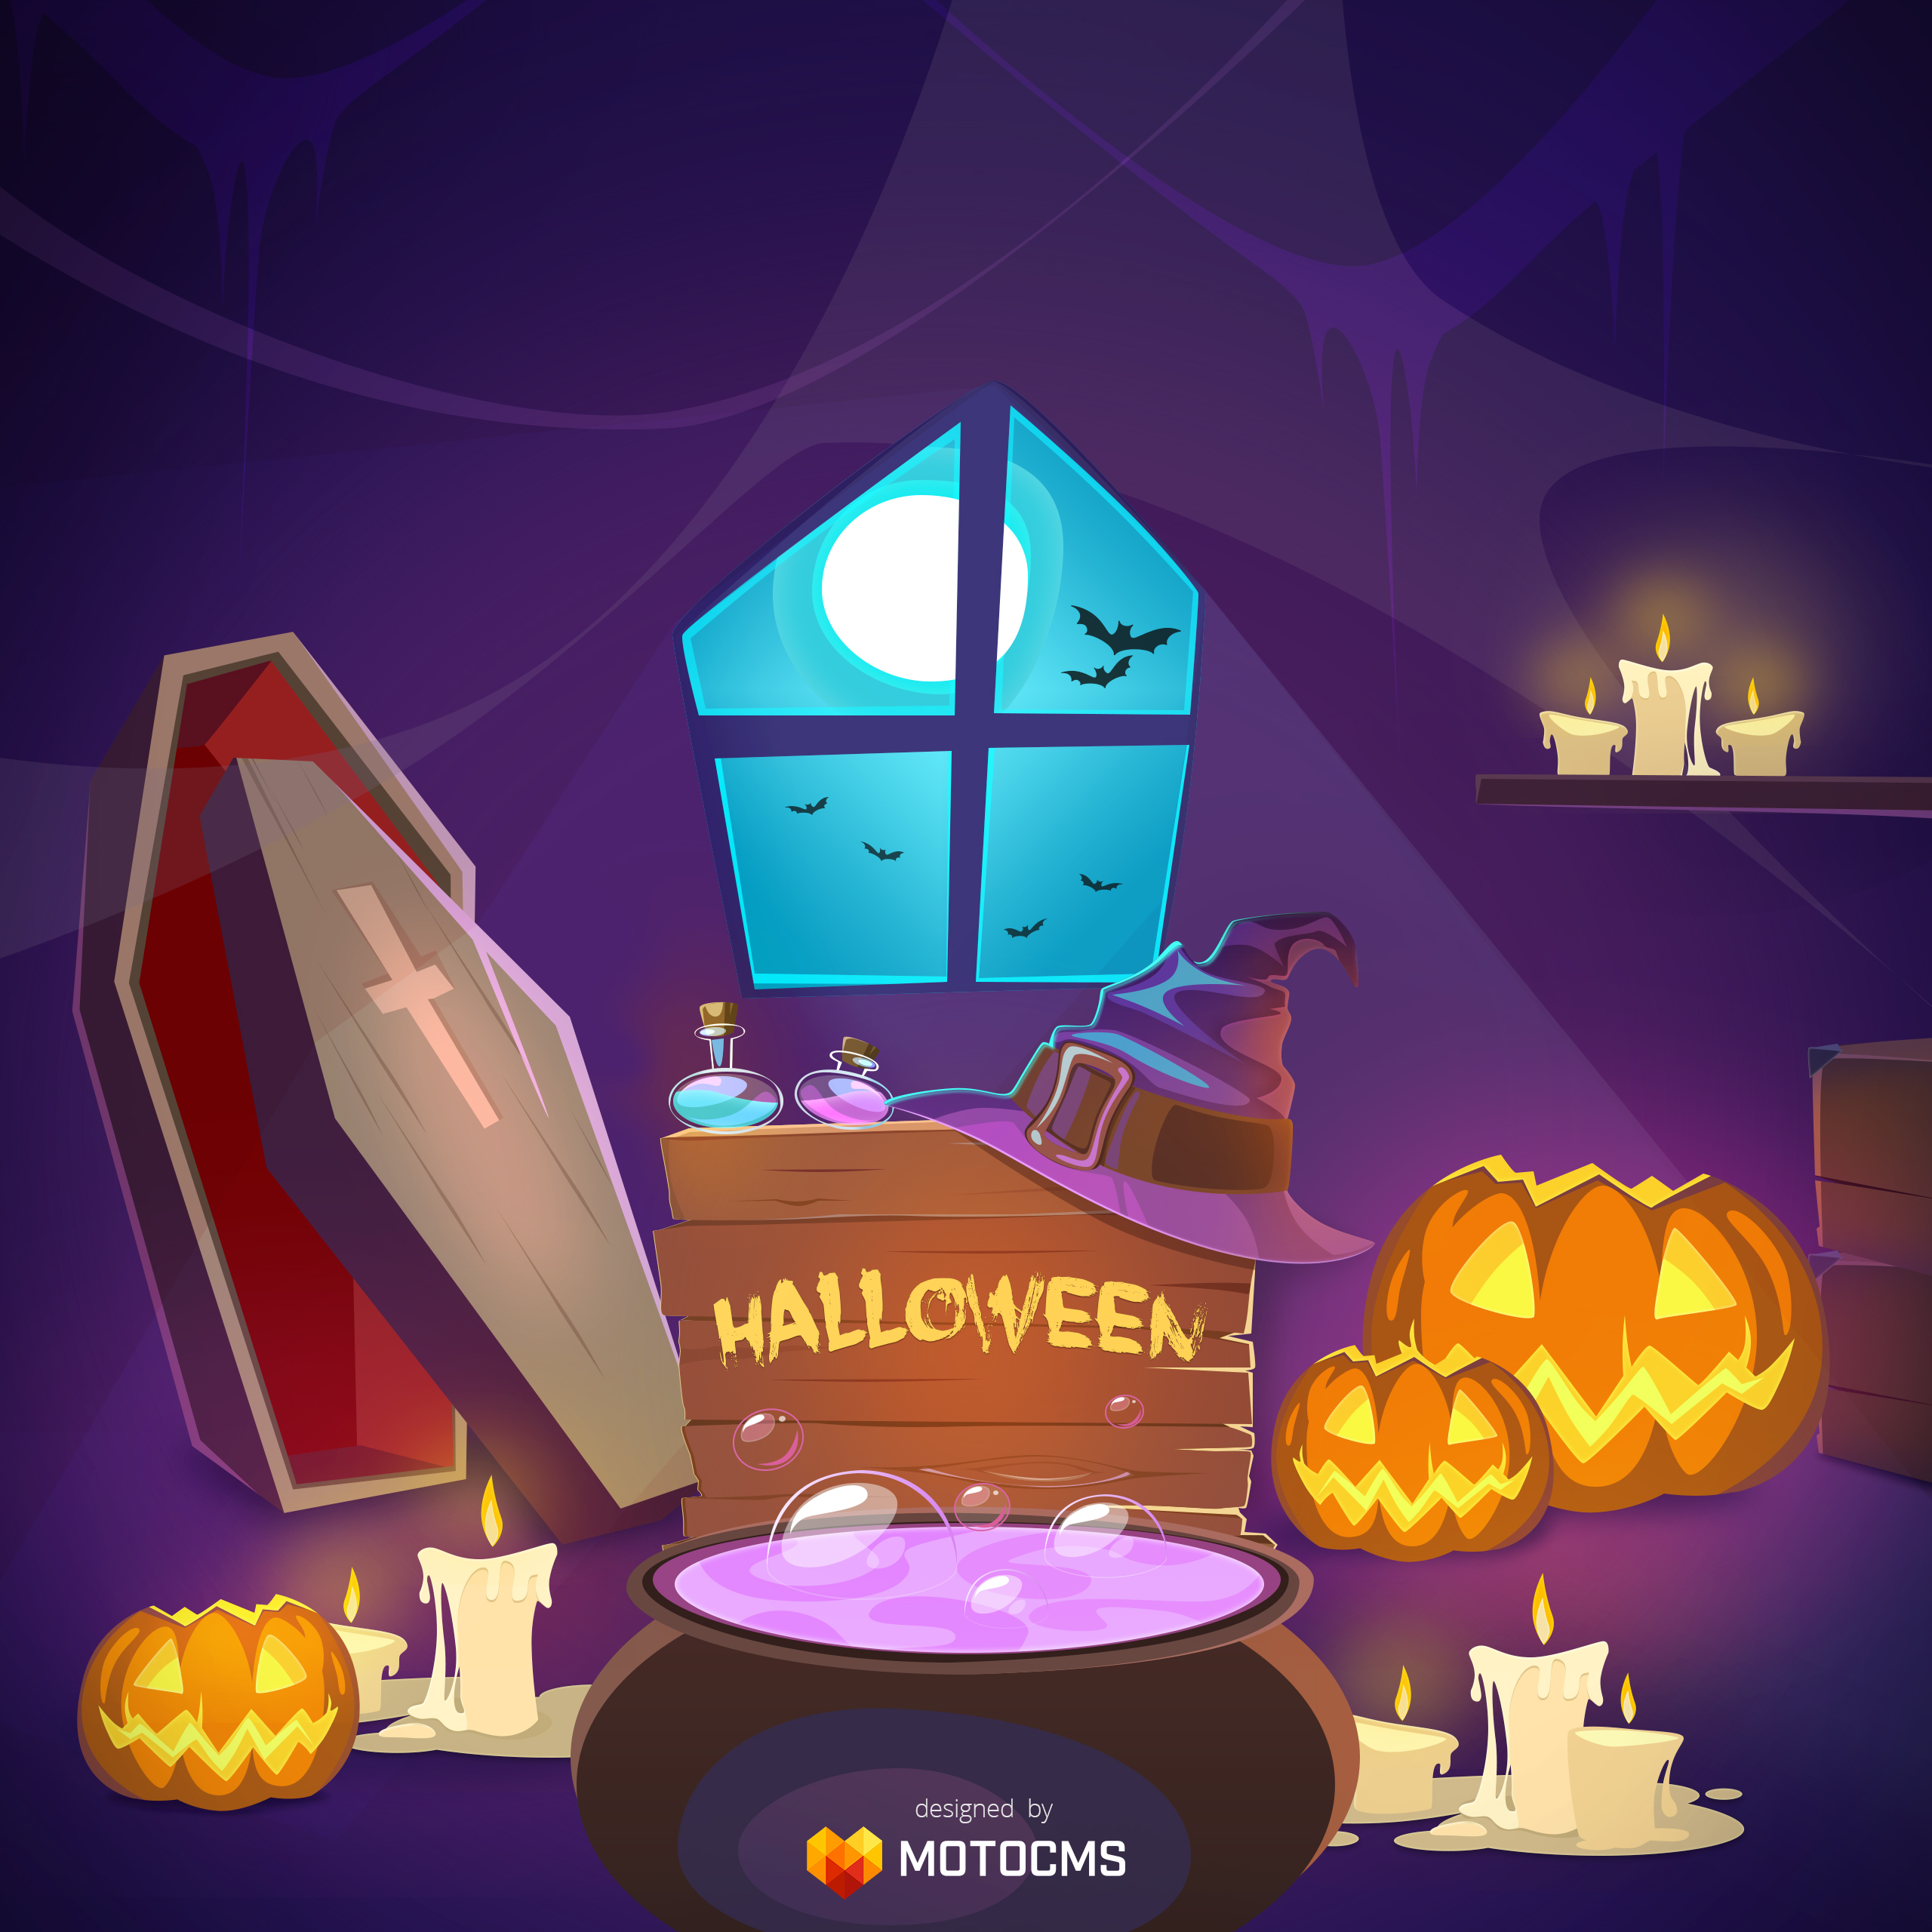 Free Halloween Wallpapers 2015 You’ll Wish to Have